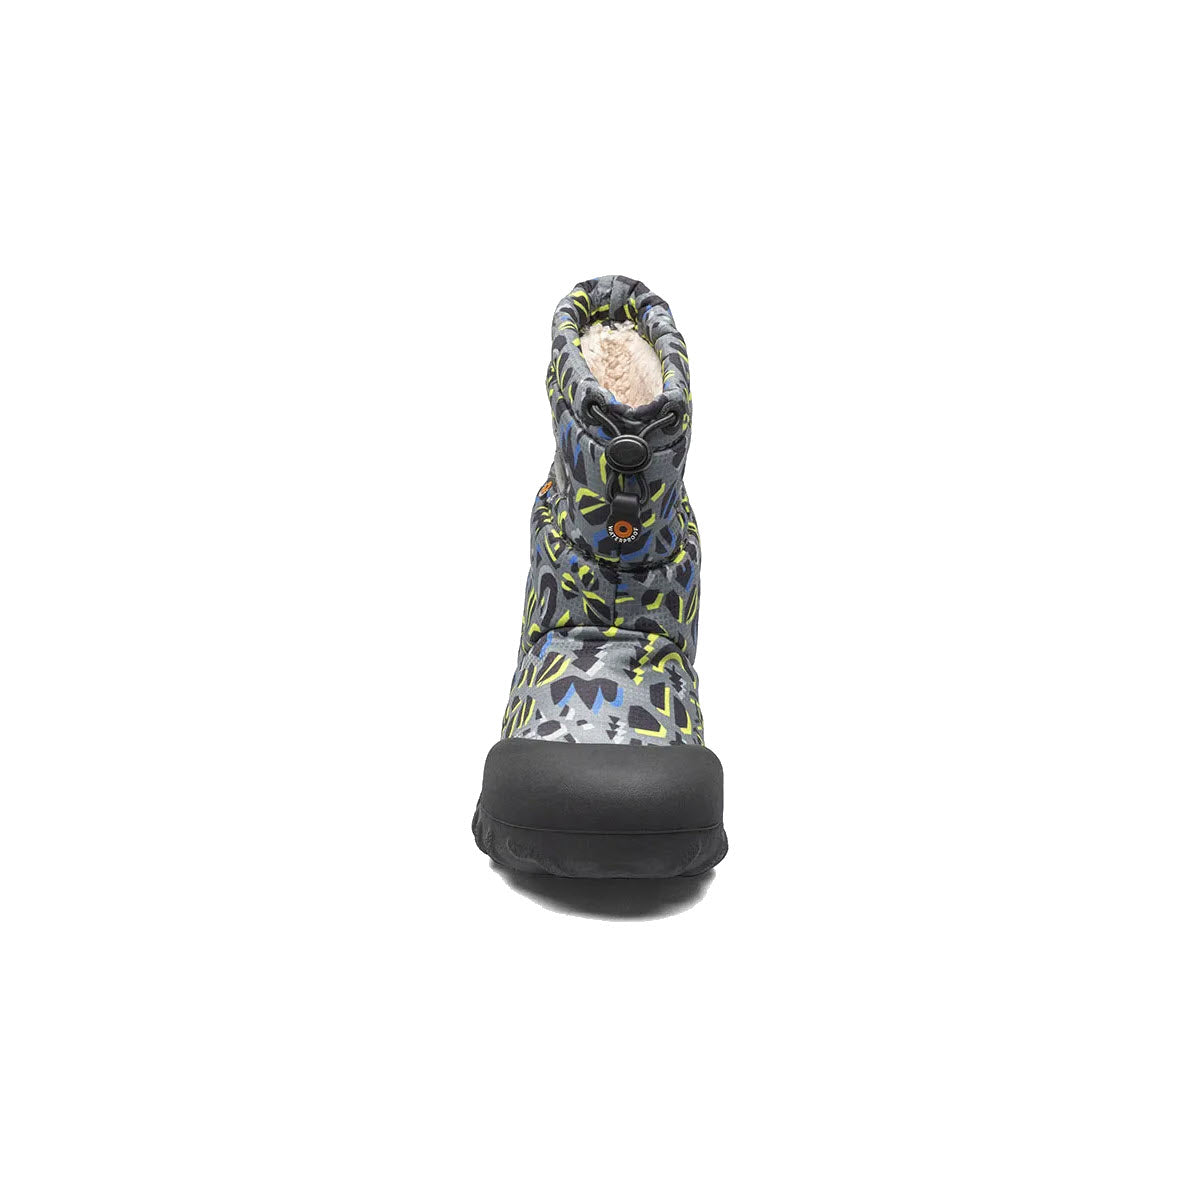 A single Bogs BMOC Snow Adventure Gray Multi - Kids waterproof insulated winter boot with a patterned design, viewed from the front.